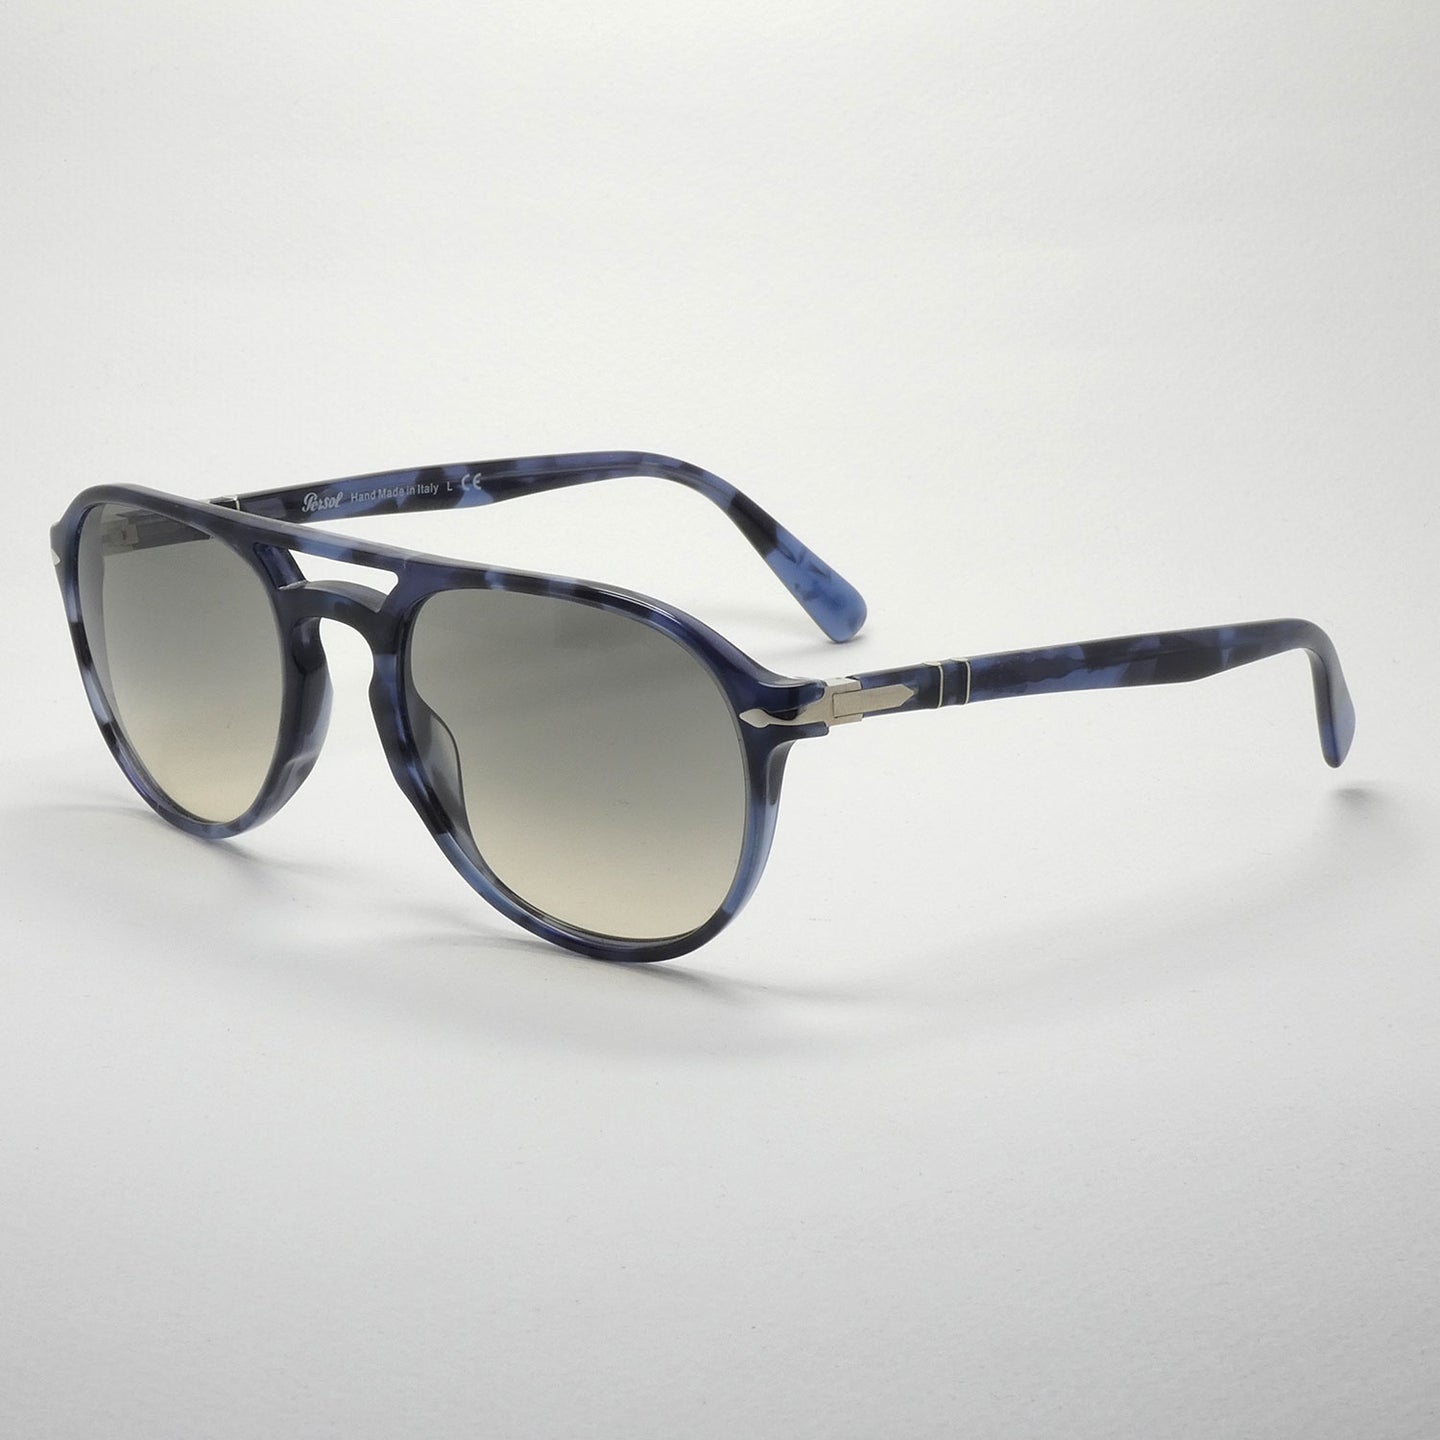 sunglasses persol 3235 1105/32 size 55 angled view